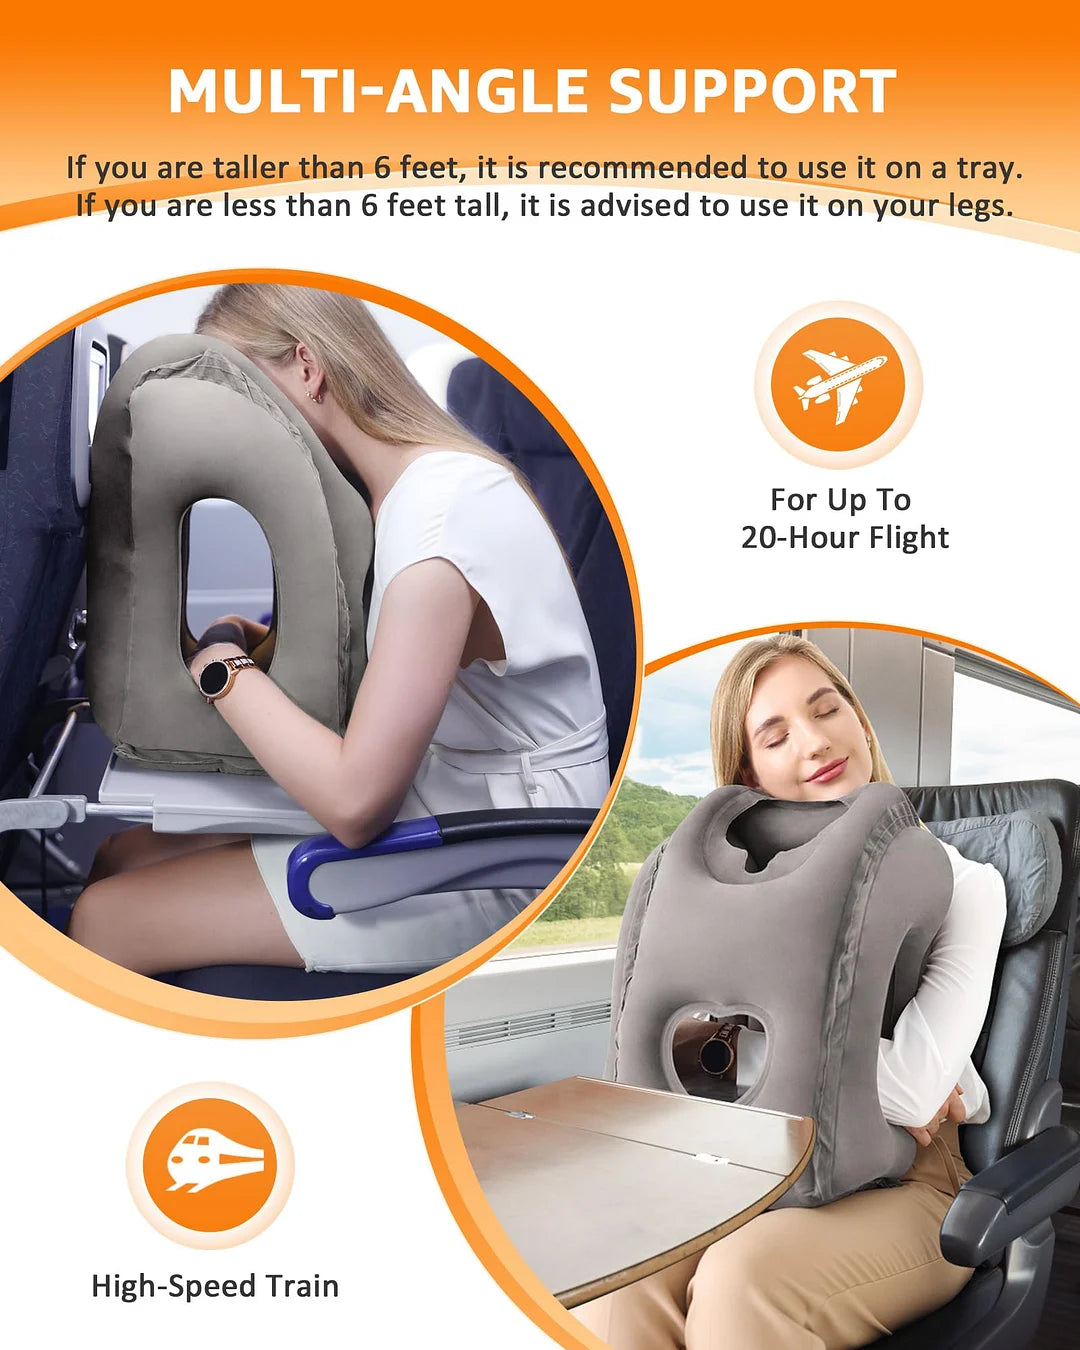 Inflatable Travel Air Pillow